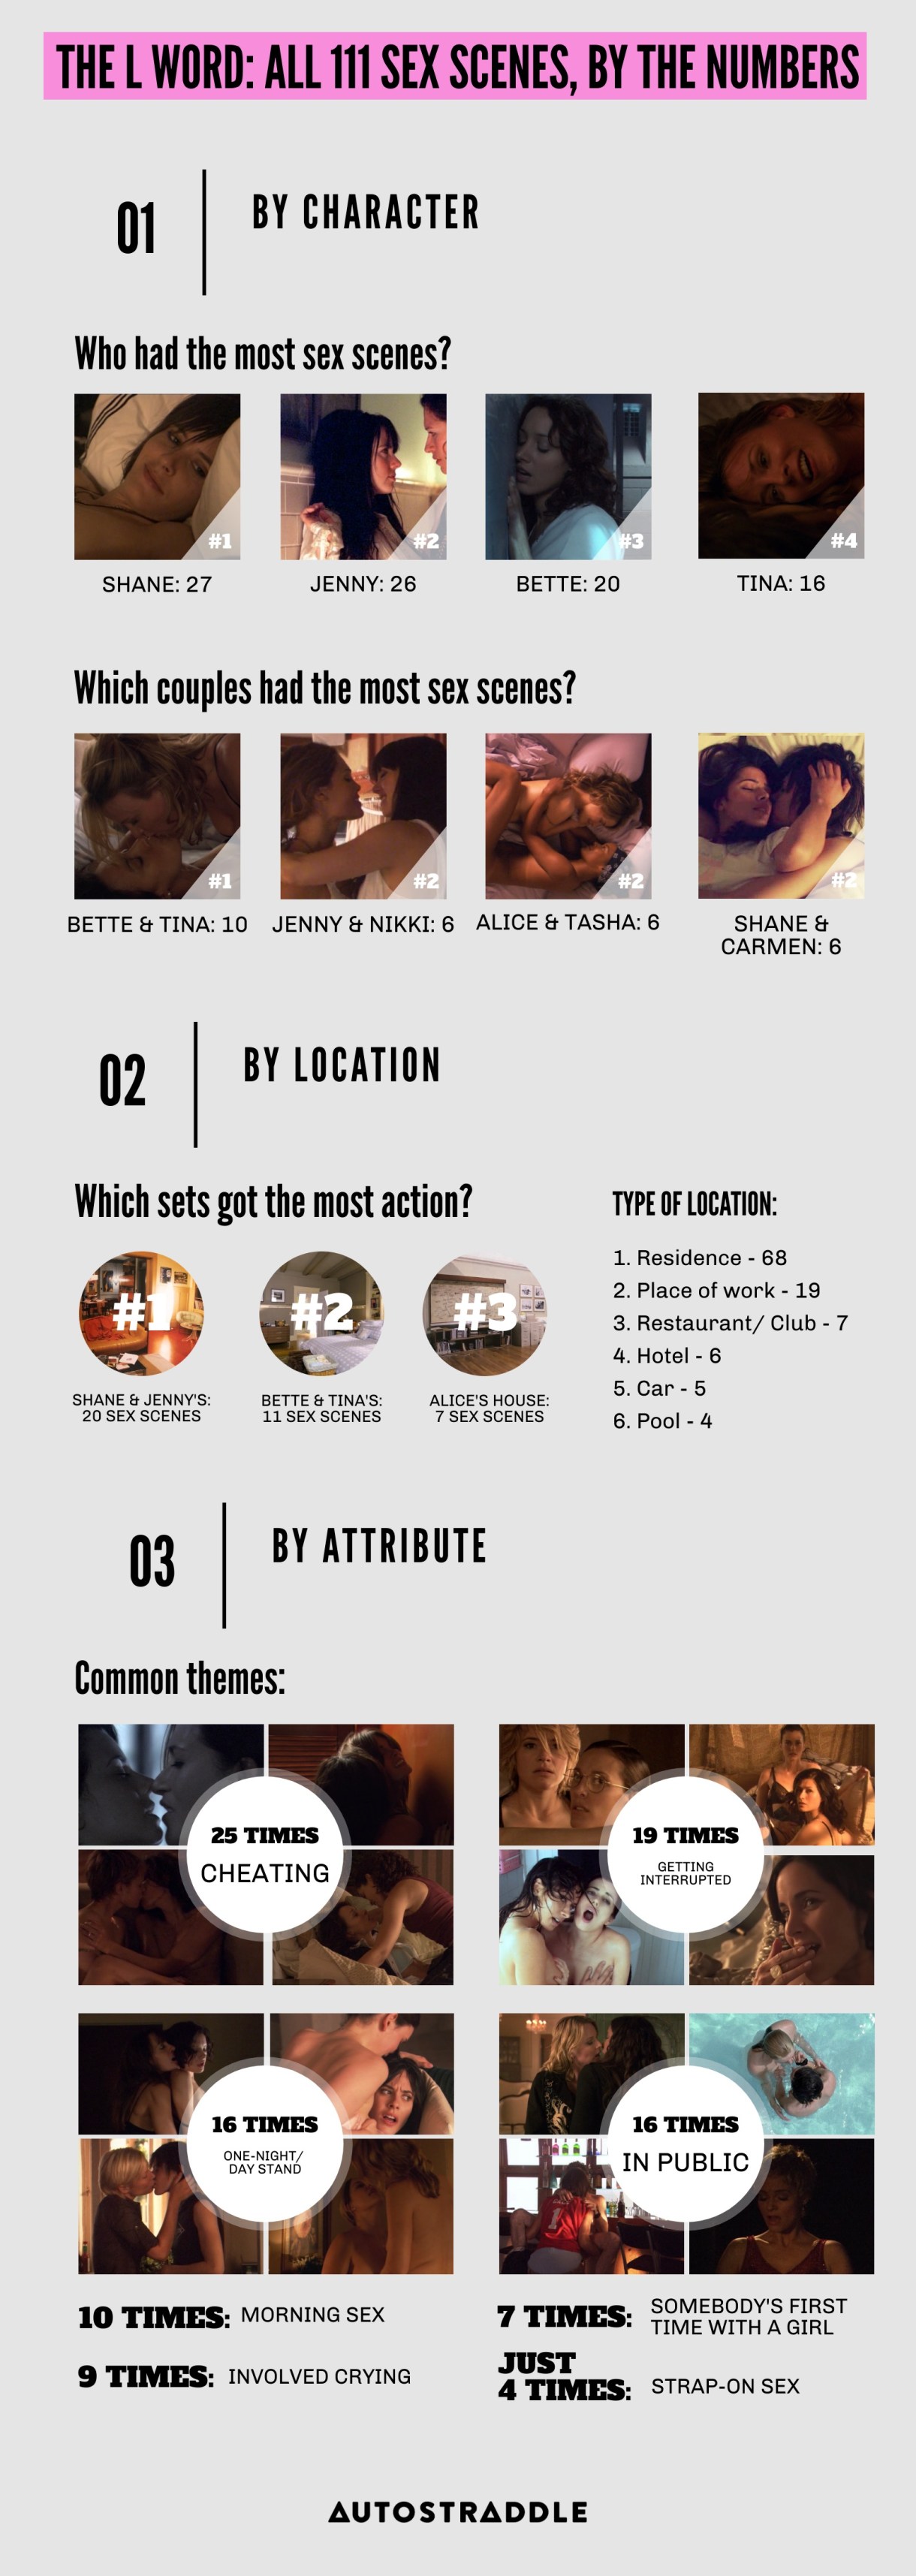 Infographic breaking down patterns in L Word Sex Scenes by character, location and attribute.